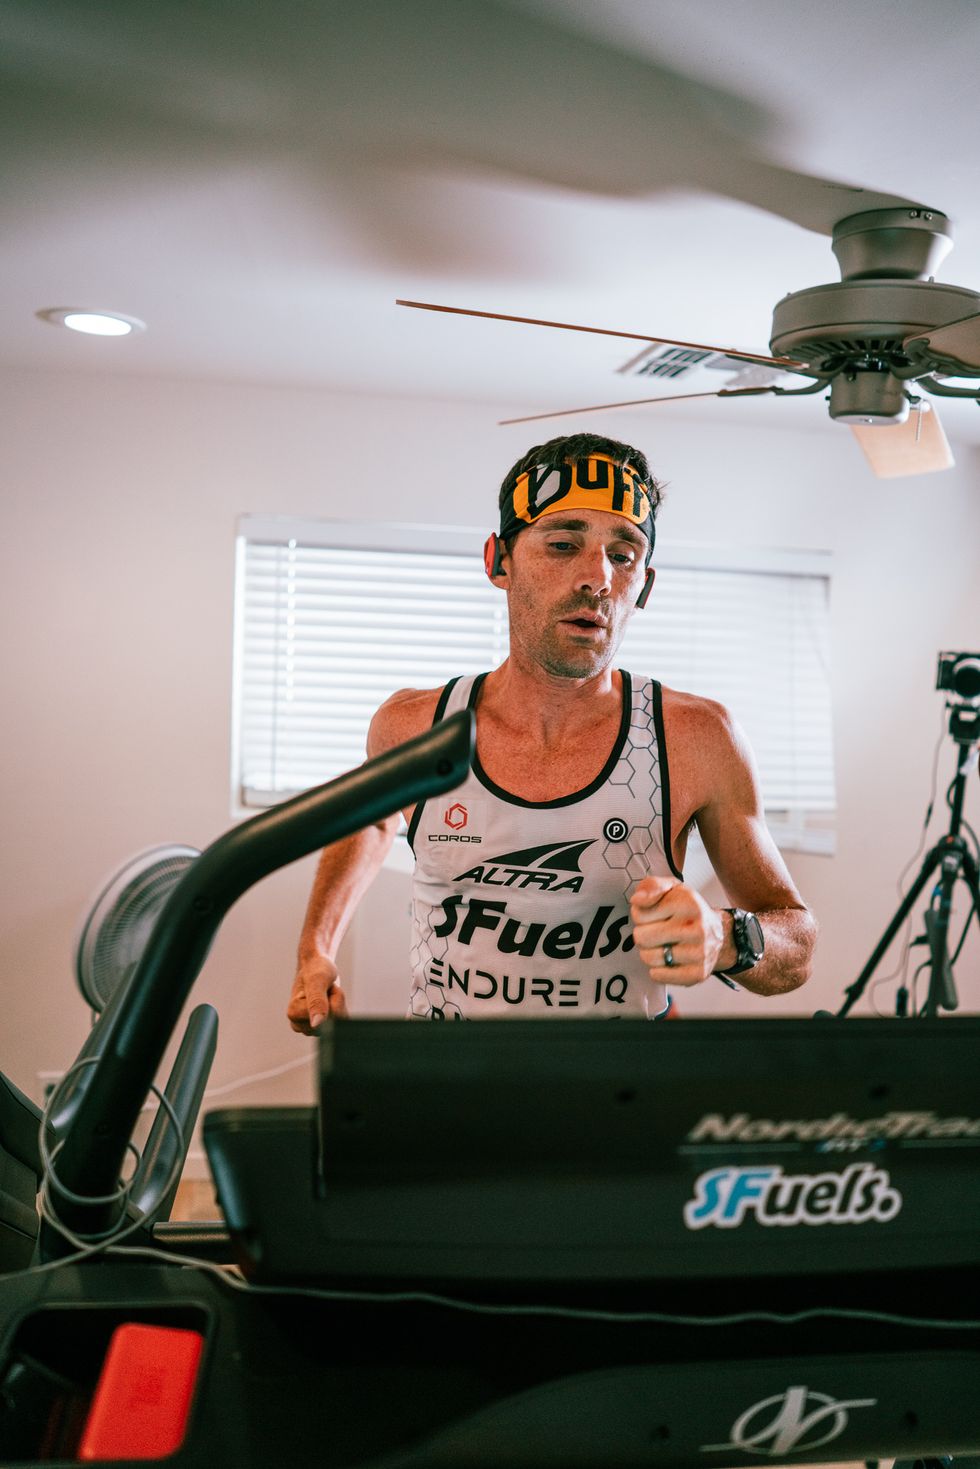 zach bitter on the treadmill during his 100 mile treadmill record run bitter switched between two machines throughout his run so they wouldn’t time out and for variety